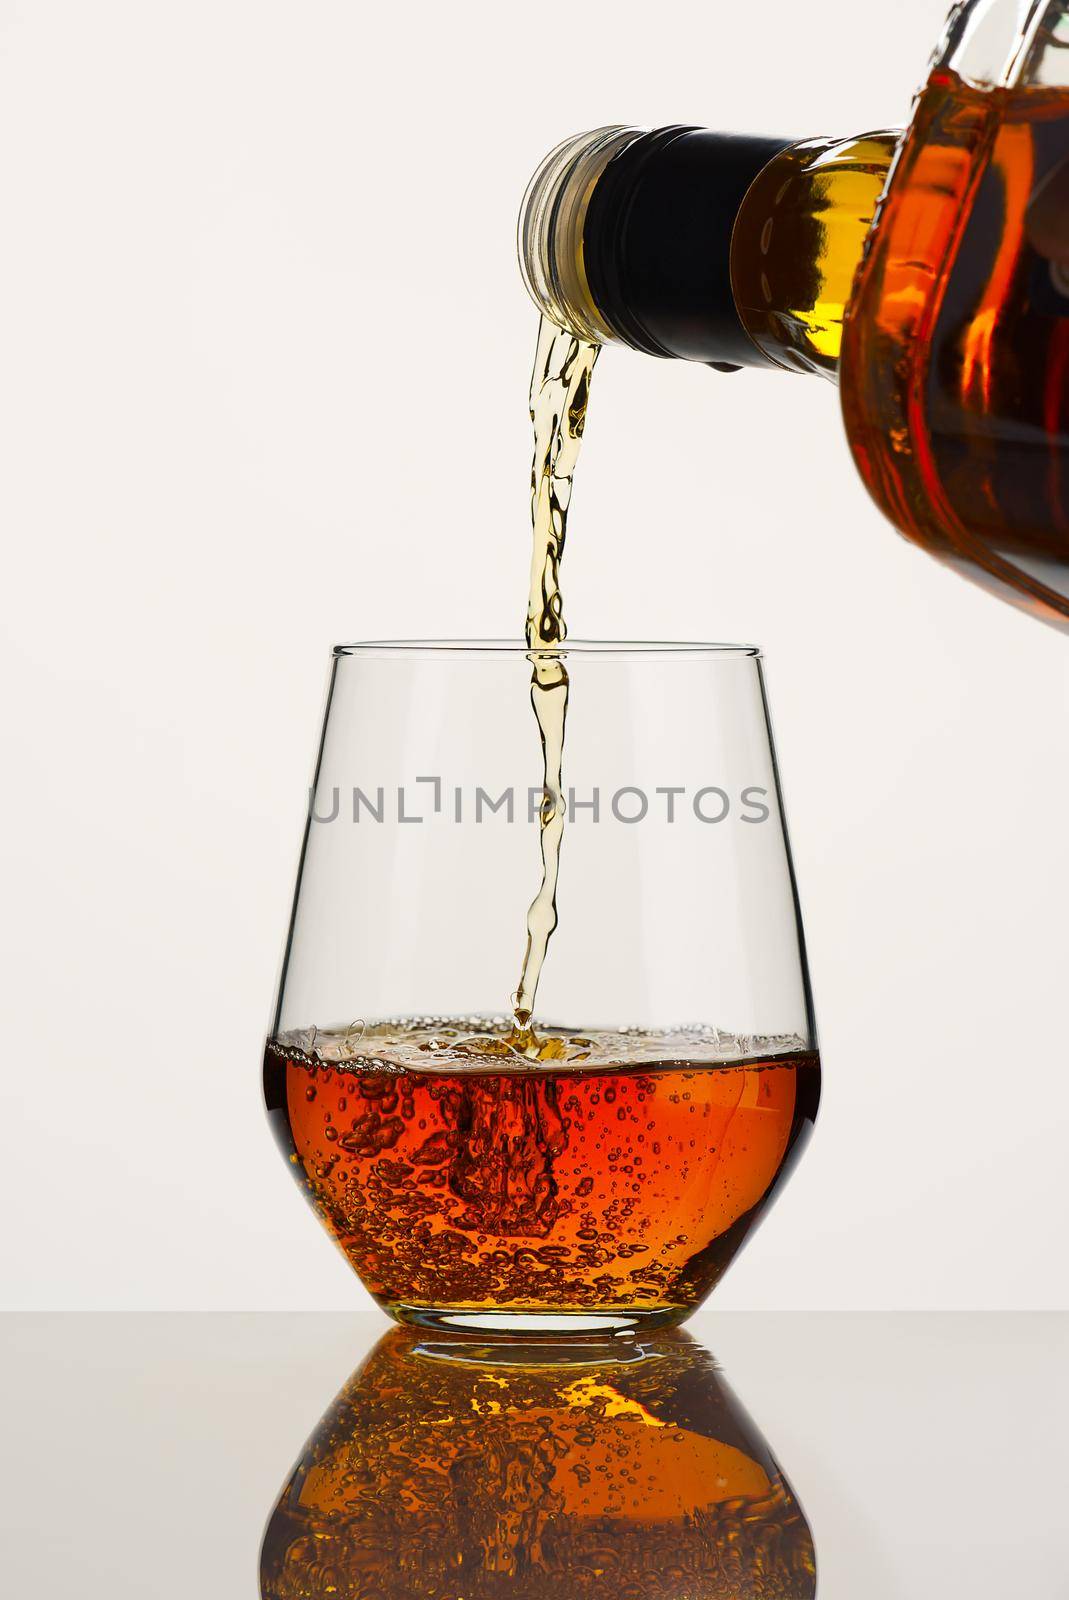 whiskey or brandy being poured into a glass from bottle on white background. Pouring whisky from a bottle by PhotoTime